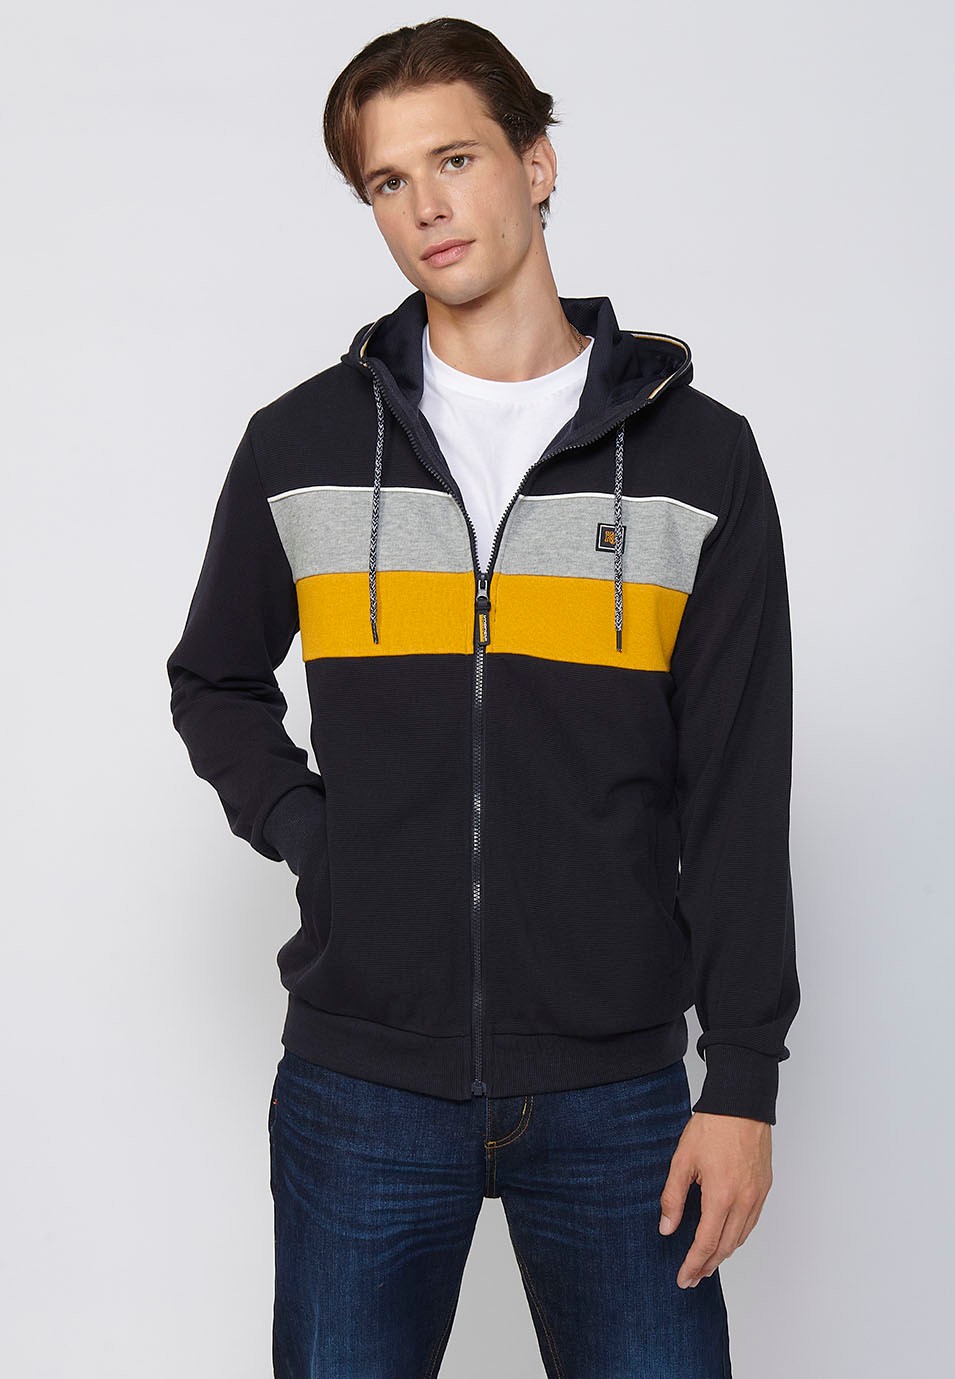 Long-sleeved sweatshirt jacket with adjustable hooded collar with drawstring and front zipper closure in Navy for Men